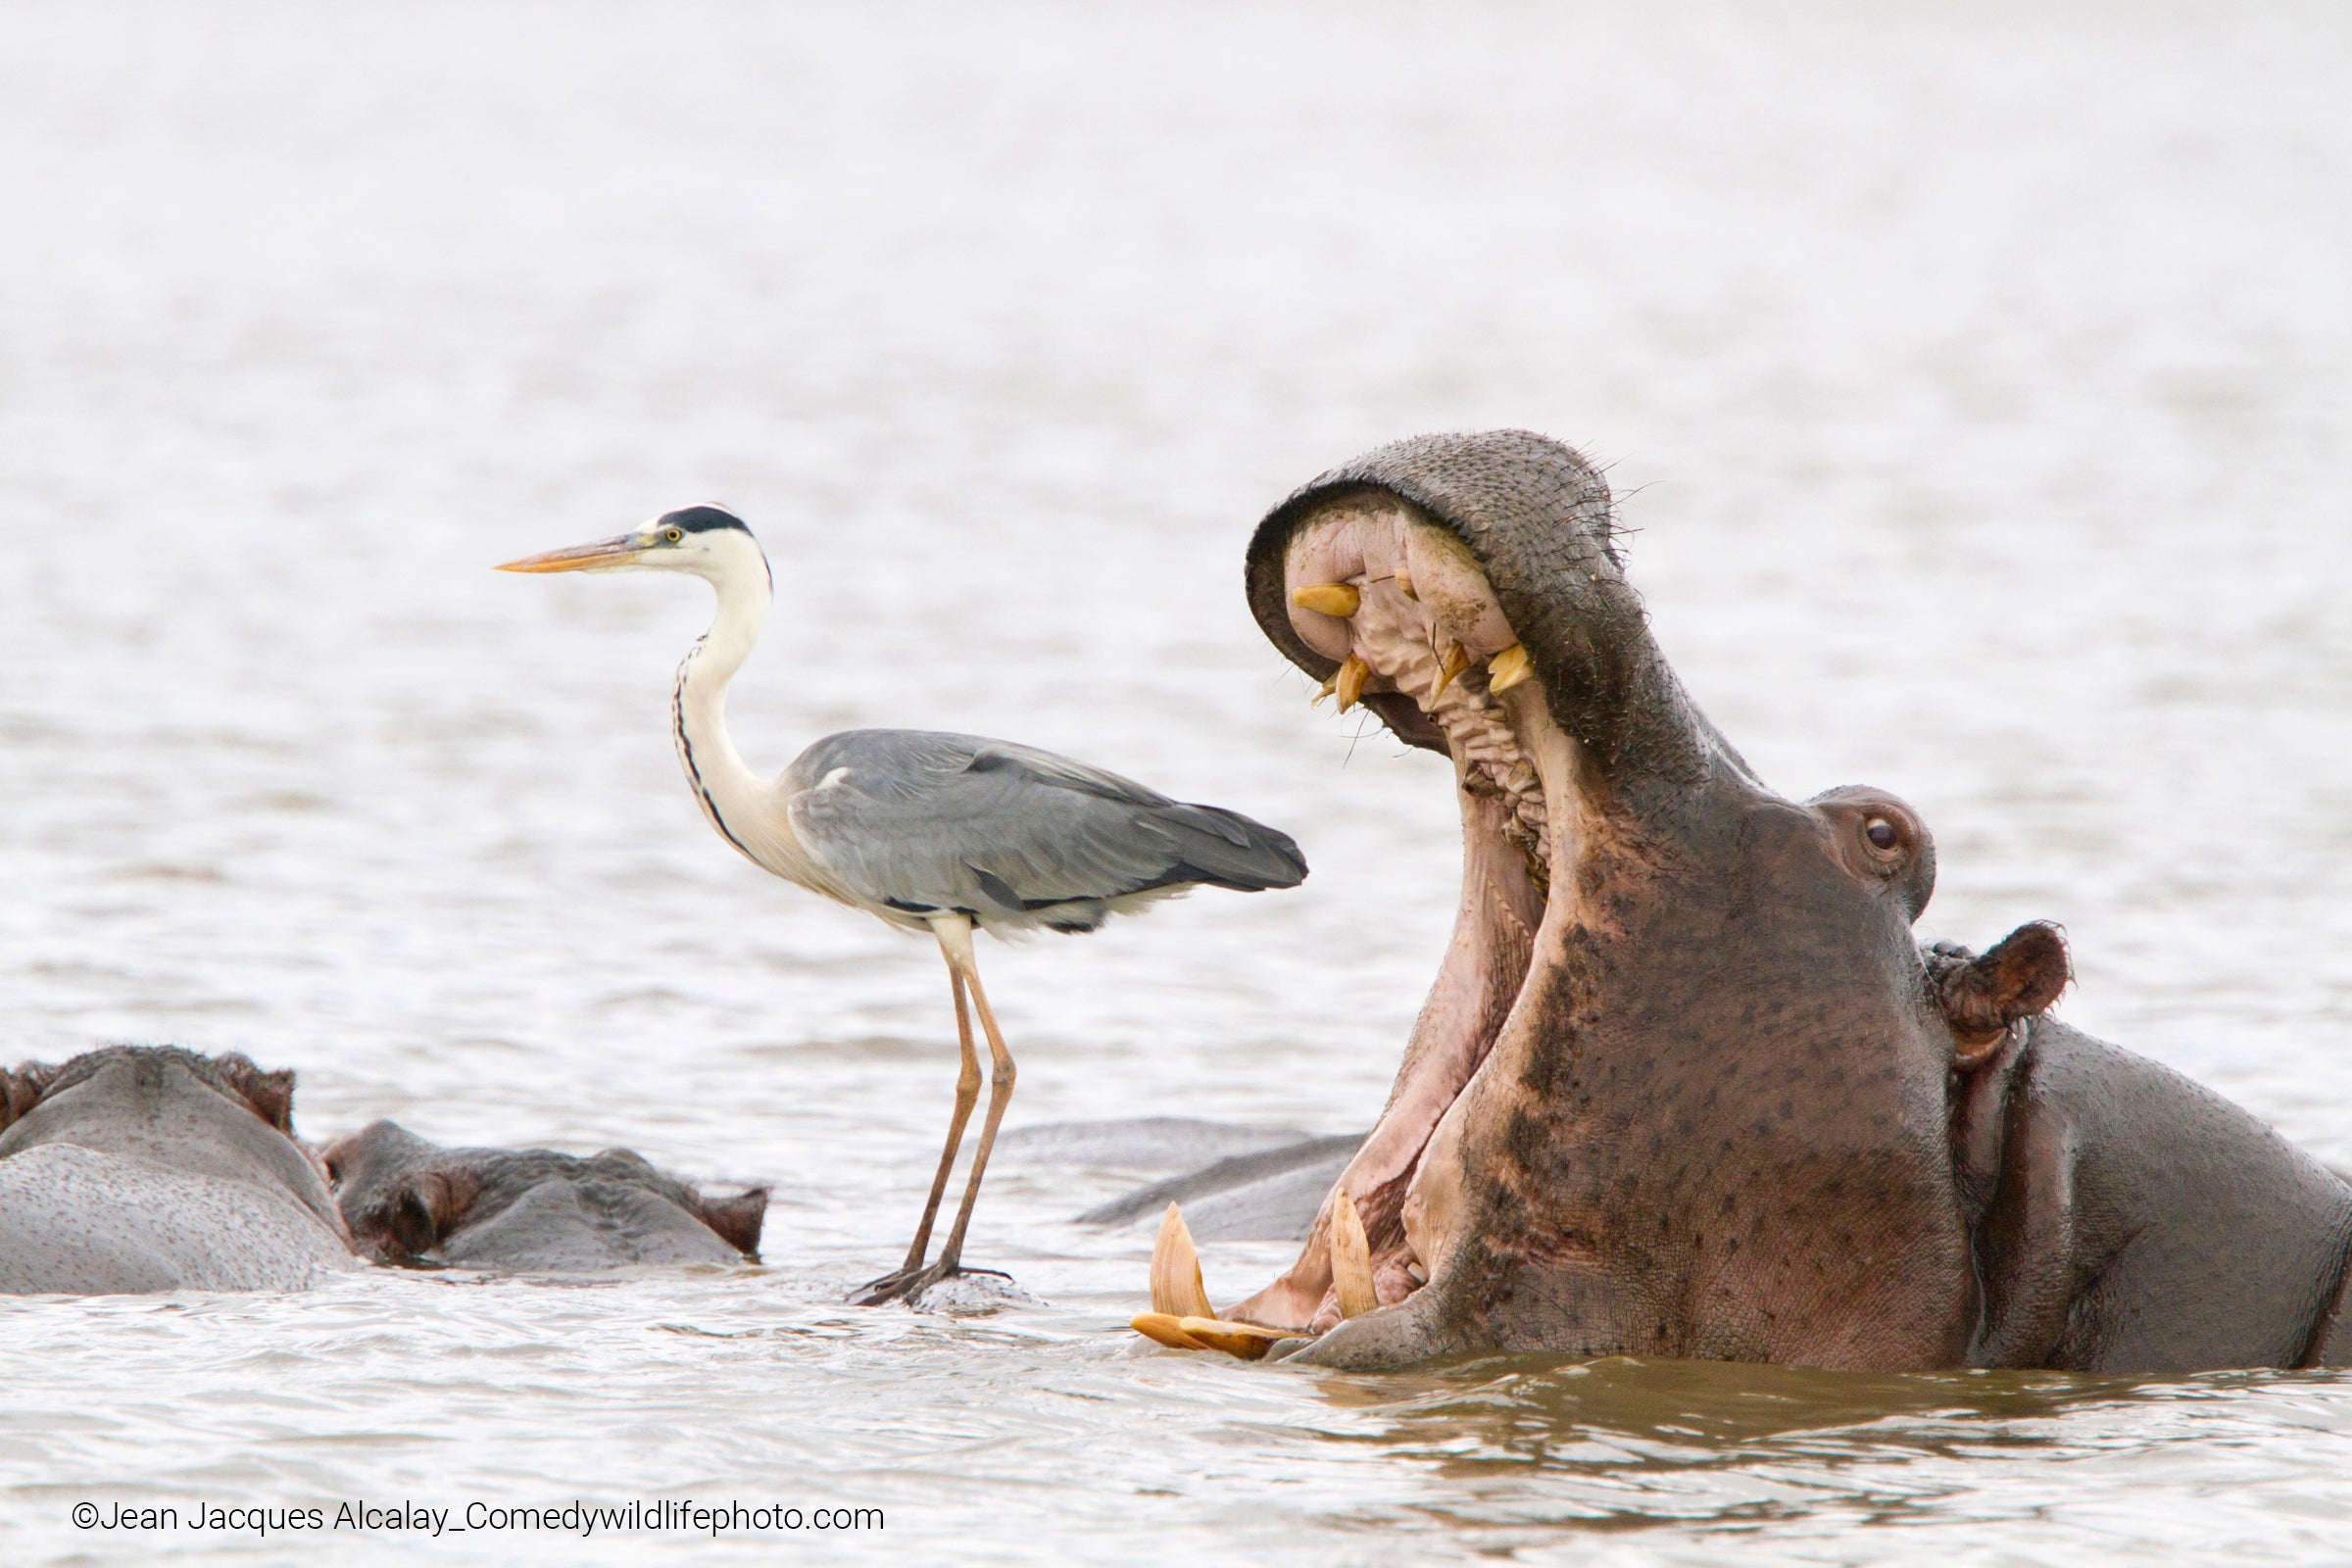 A hippo appears to try too swallow a heron. (Photo: © Jean Jacques Alcalay / Comedywildlifephoto.com.)